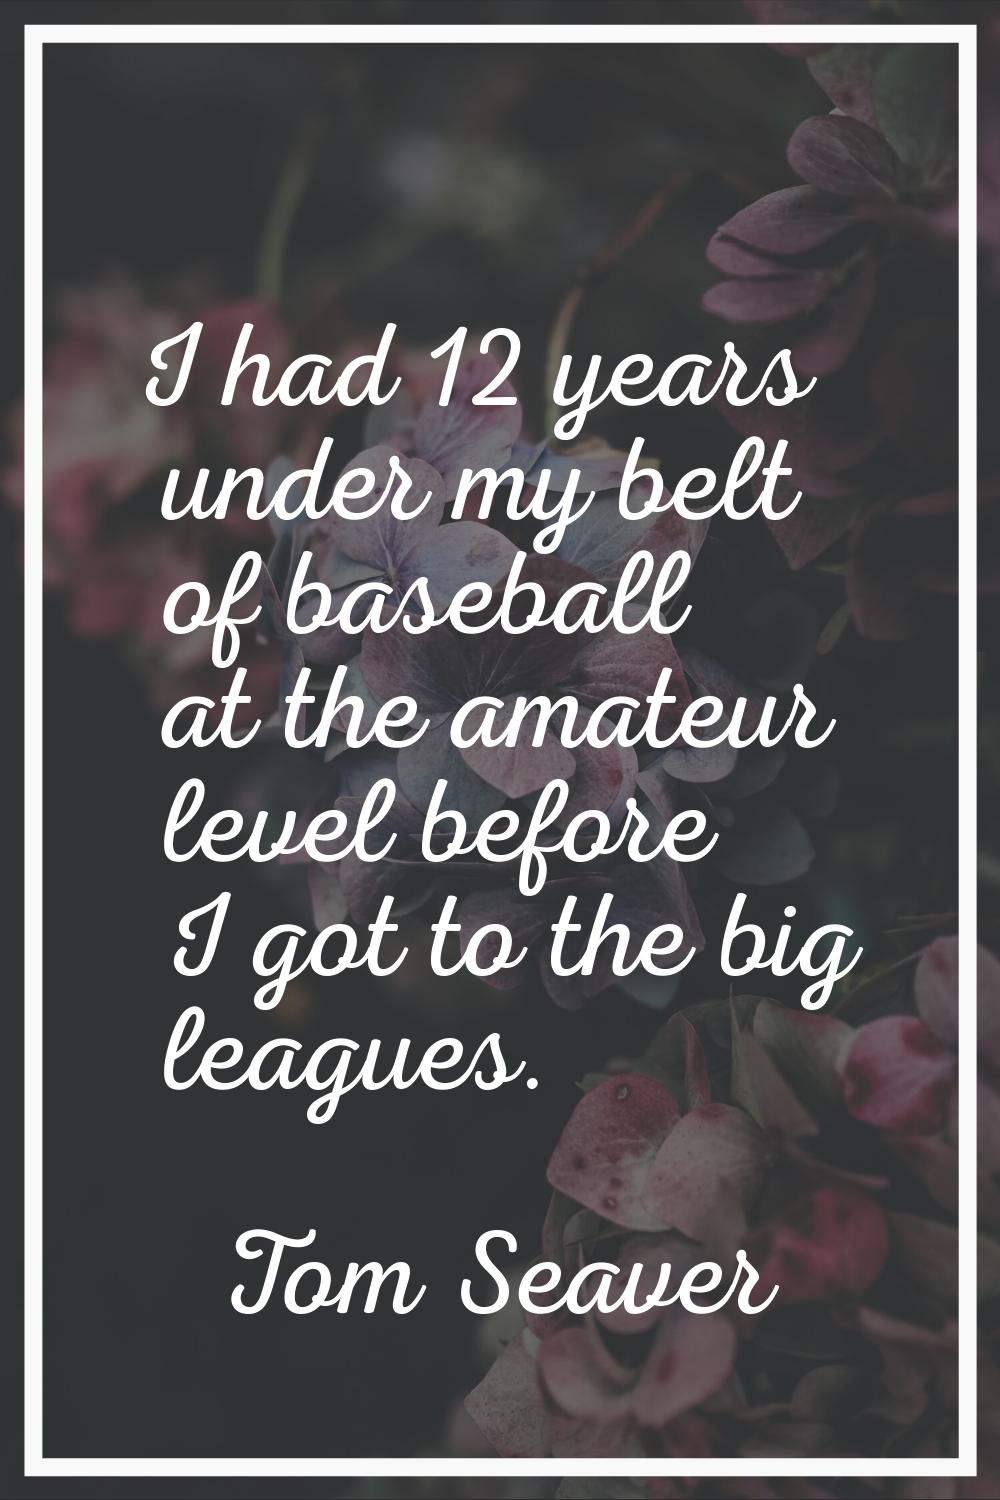 I had 12 years under my belt of baseball at the amateur level before I got to the big leagues.